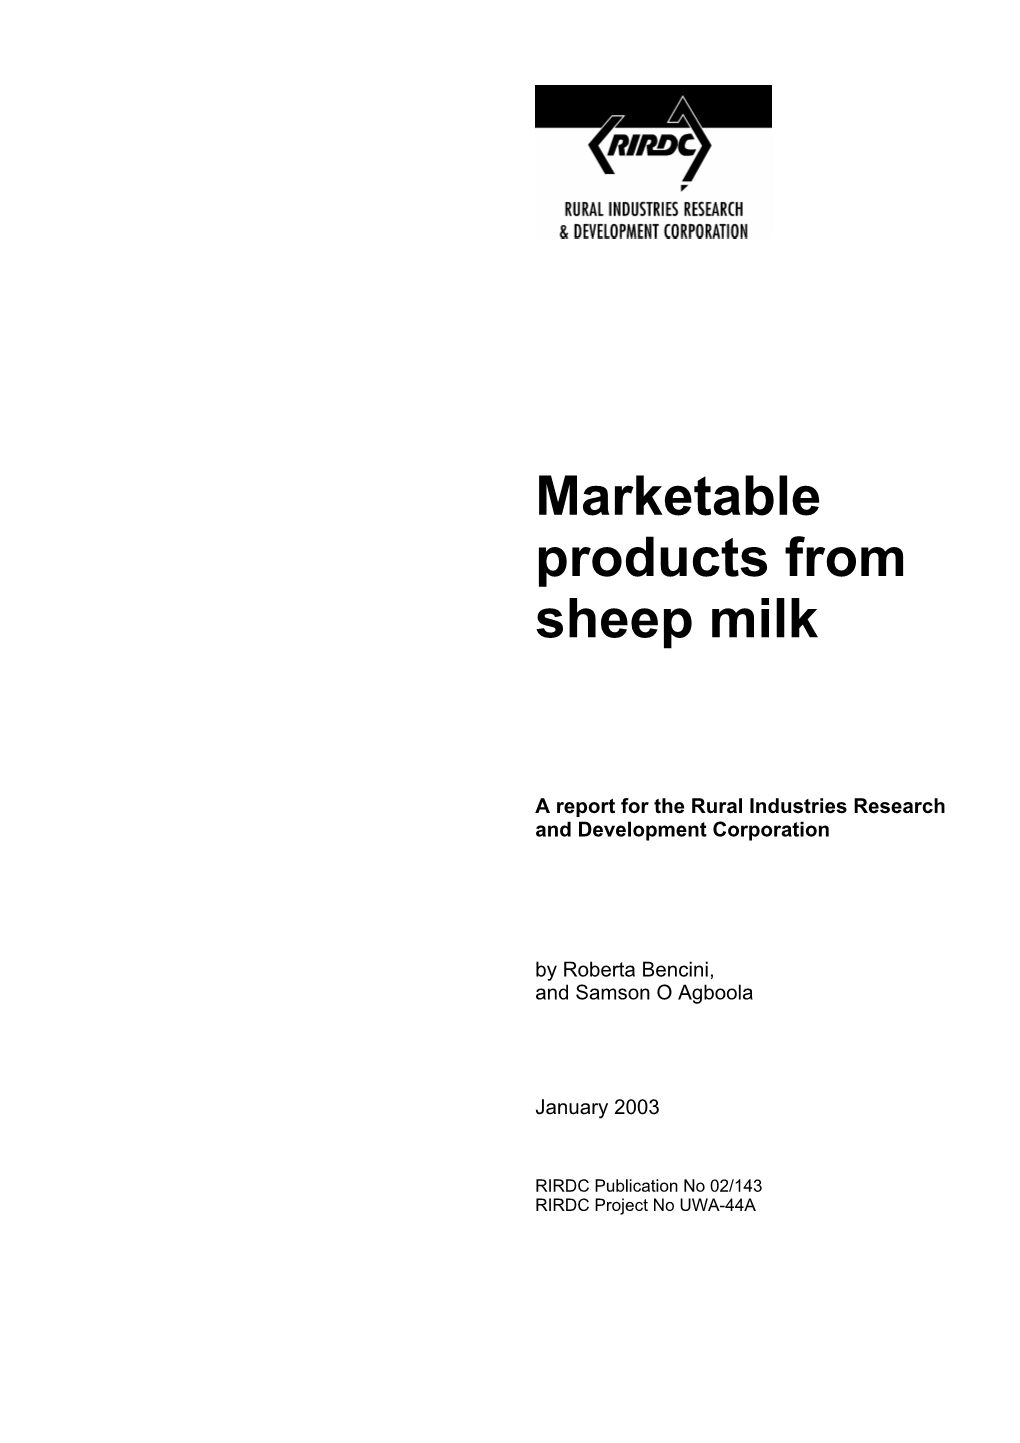 Marketable Products from Sheep Milk